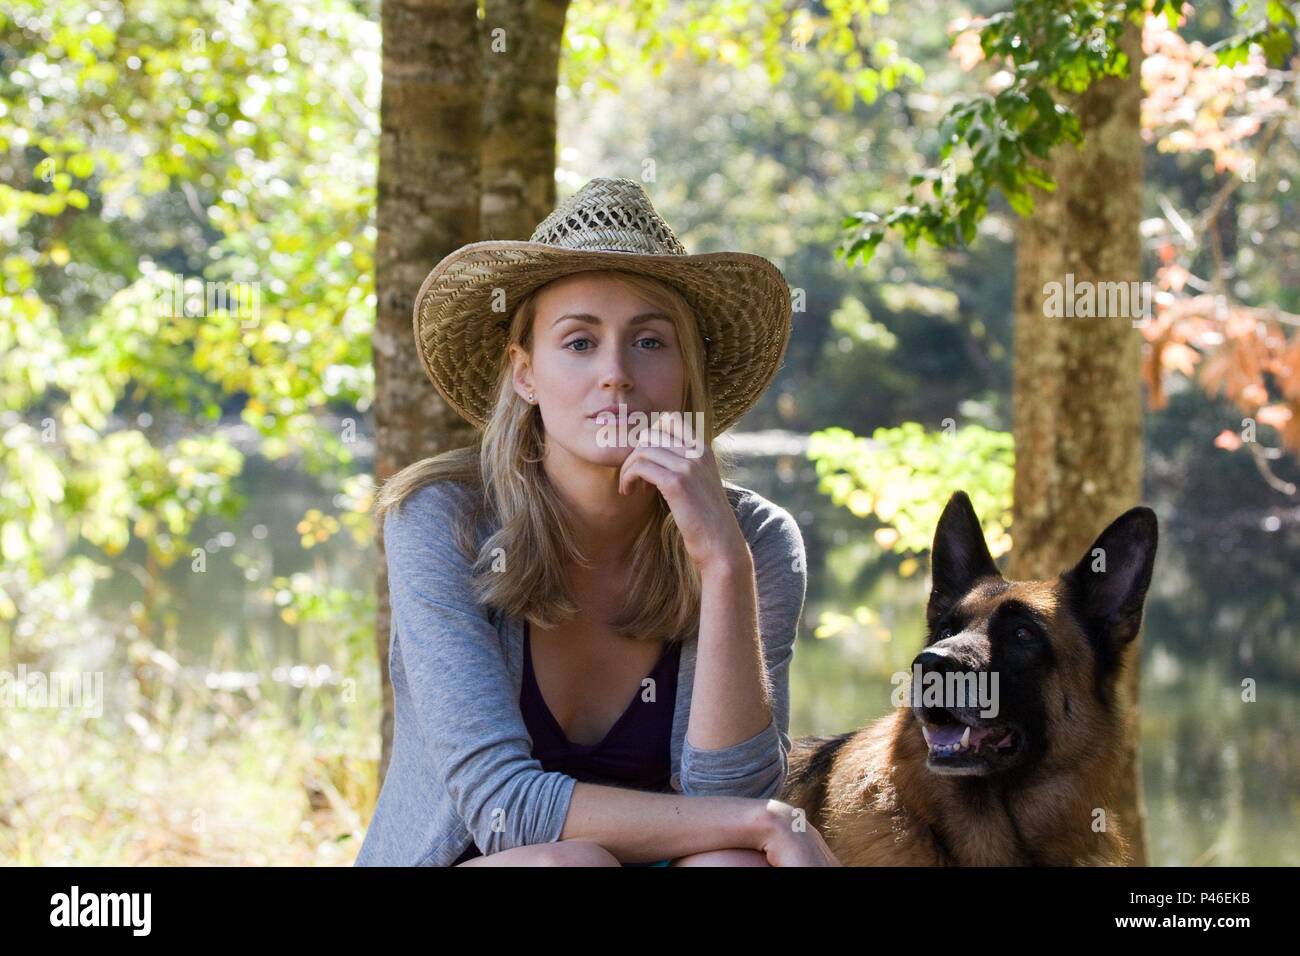 Original Film Title: THE LUCKY ONE.  English Title: THE LUCKY ONE.  Film Director: SCOTT HICKS.  Year: 2012.  Stars: TAYLOR SCHILLING. Credit: WARNER BROS. PICTURES / MARKFIELD, ALAN / Album Stock Photo